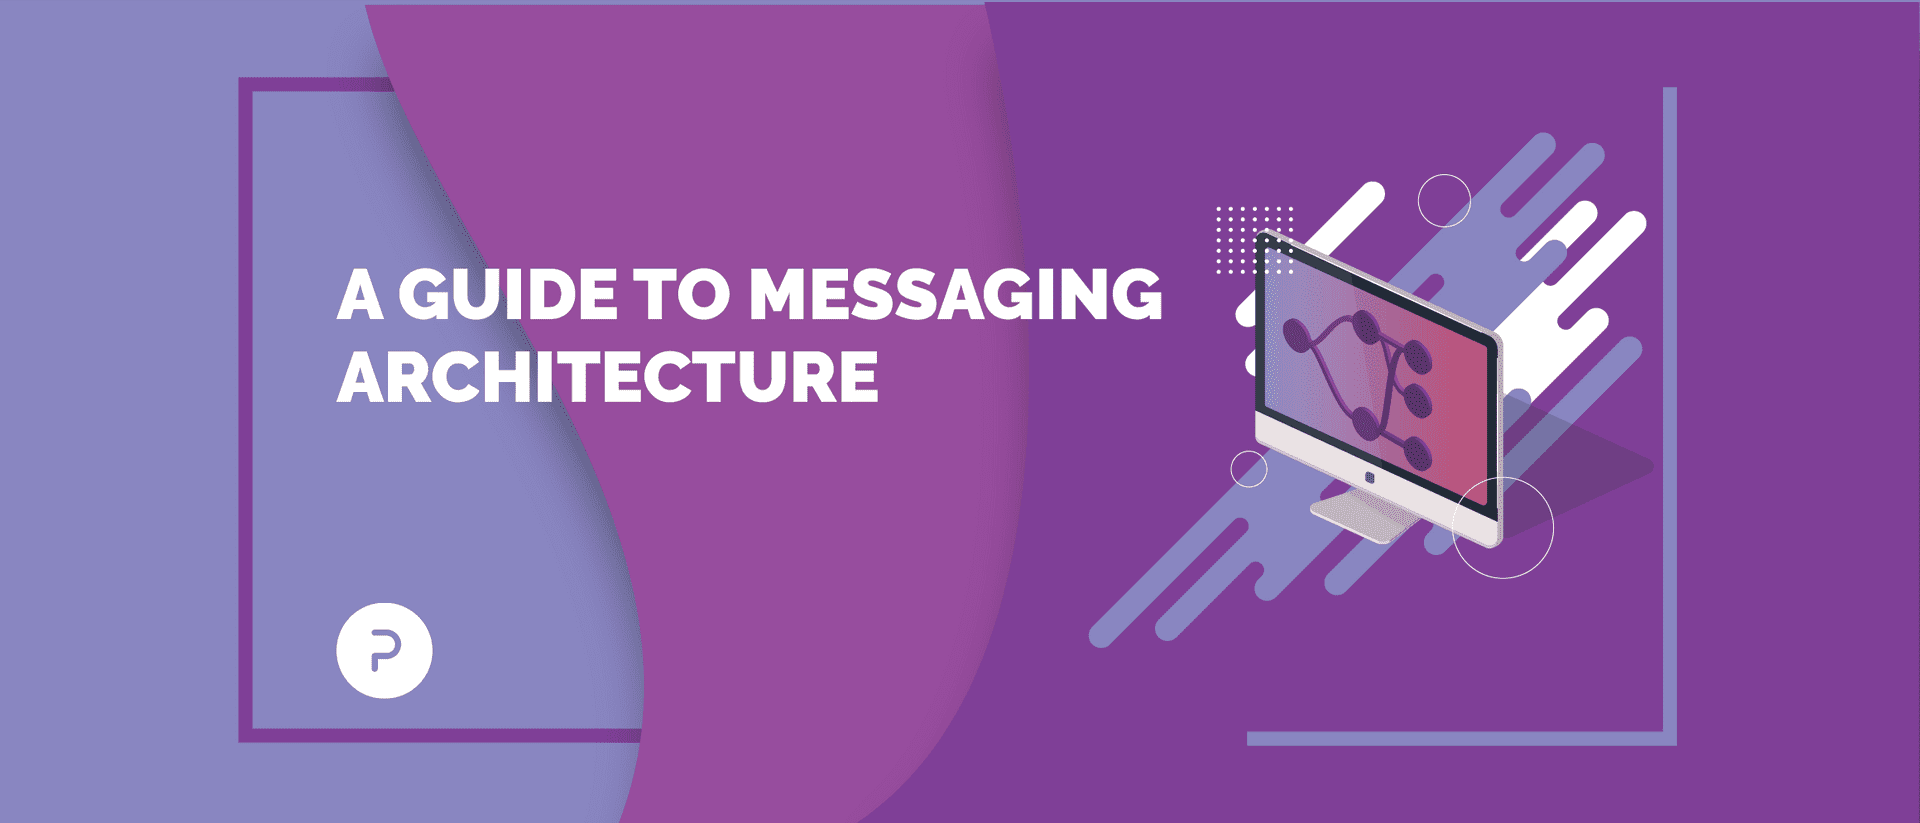 A Guide to Messaging Architecture